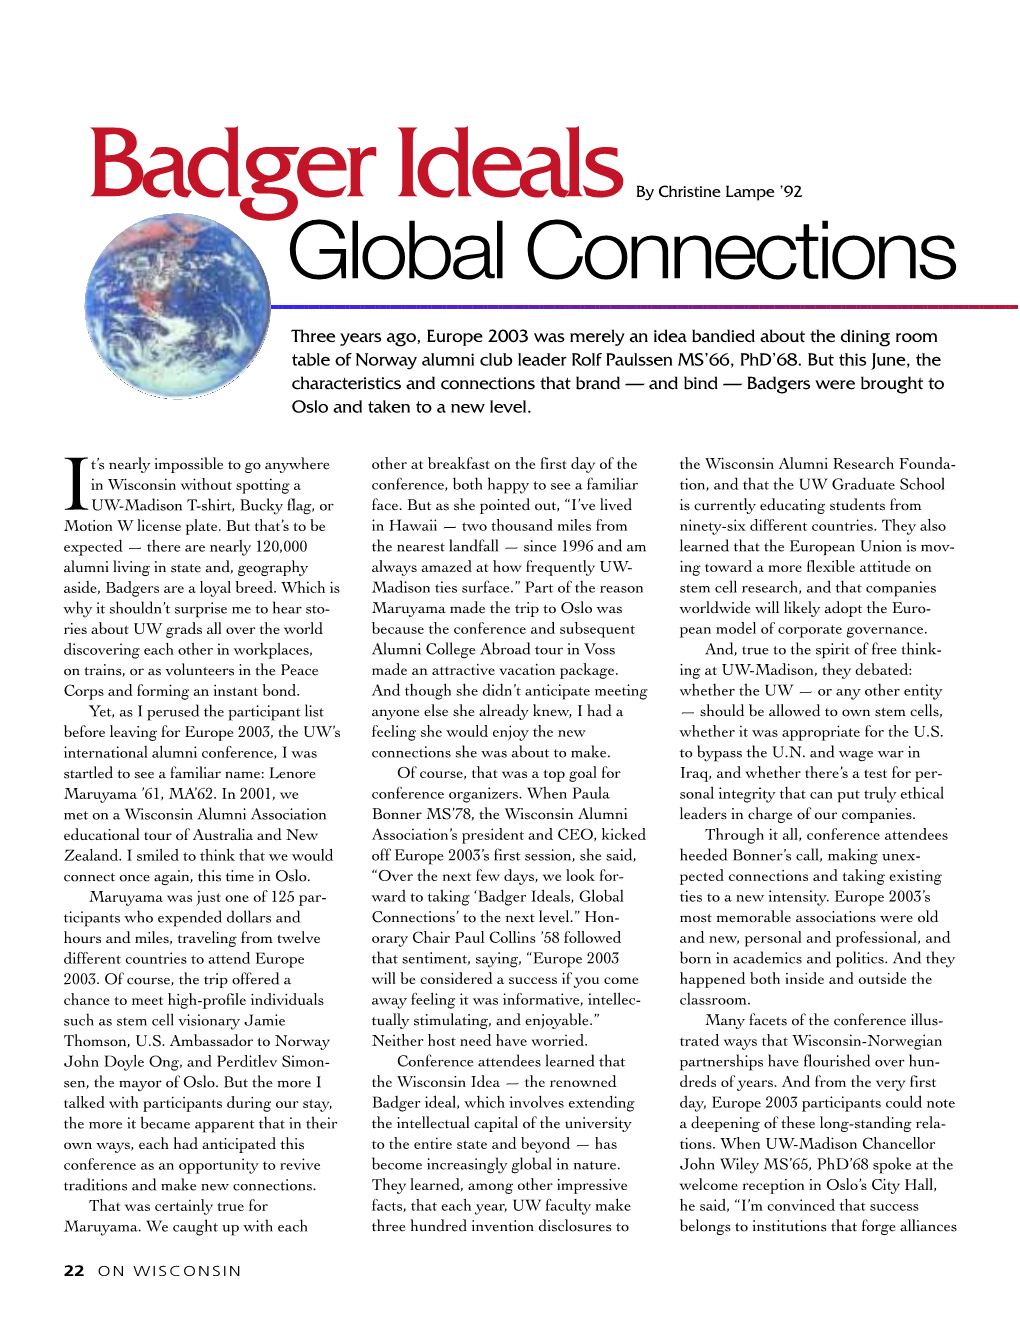 Badger Ideals by Christine Lampe ’92 Global Connections